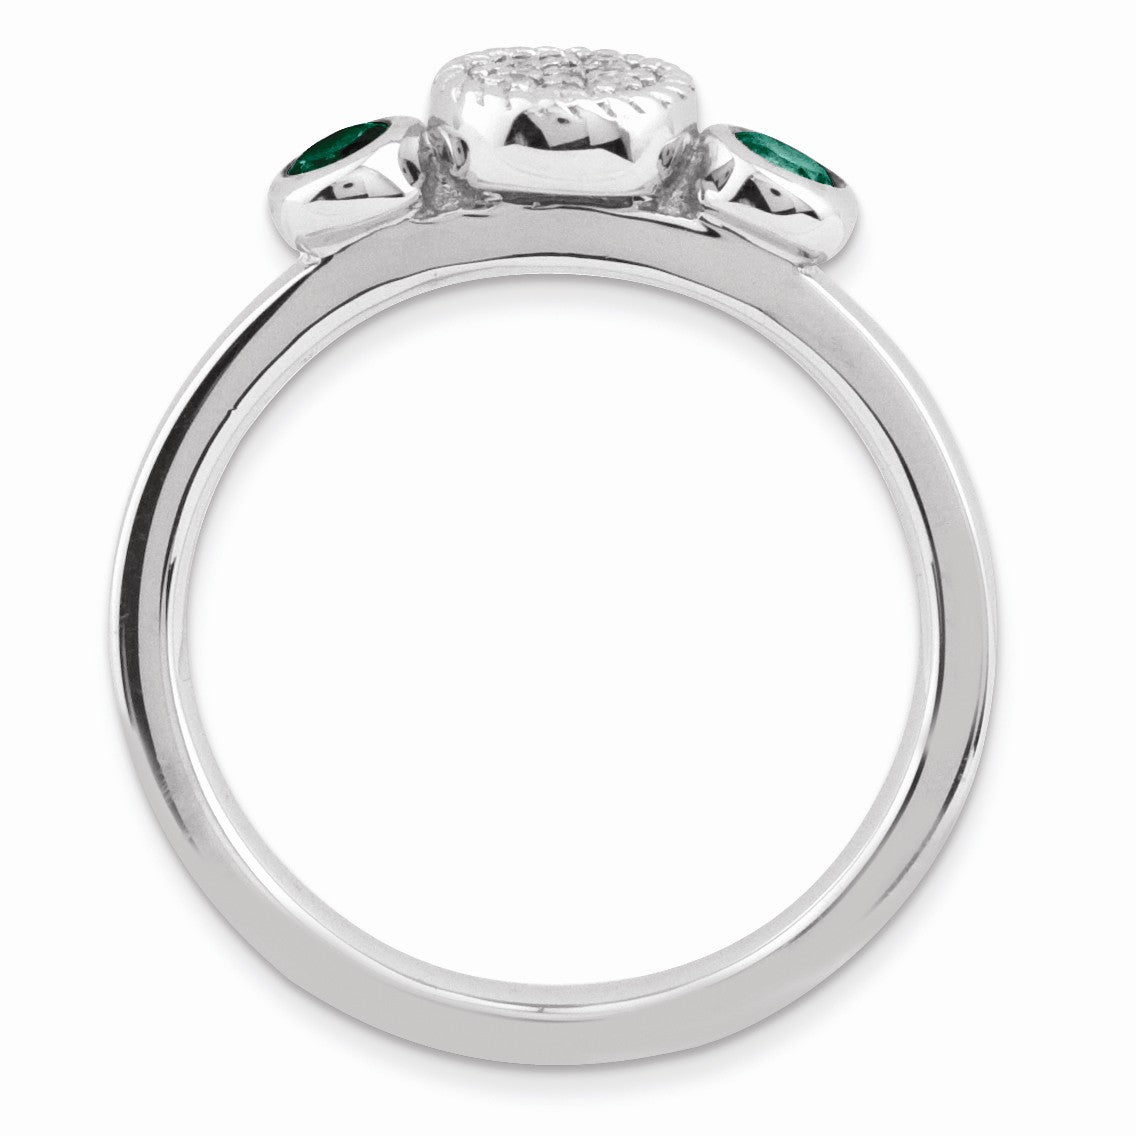 Alternate view of the Sterling Silver Stackable Created Emerald &amp; .05 Ctw HI/I3 Diamond Ring by The Black Bow Jewelry Co.